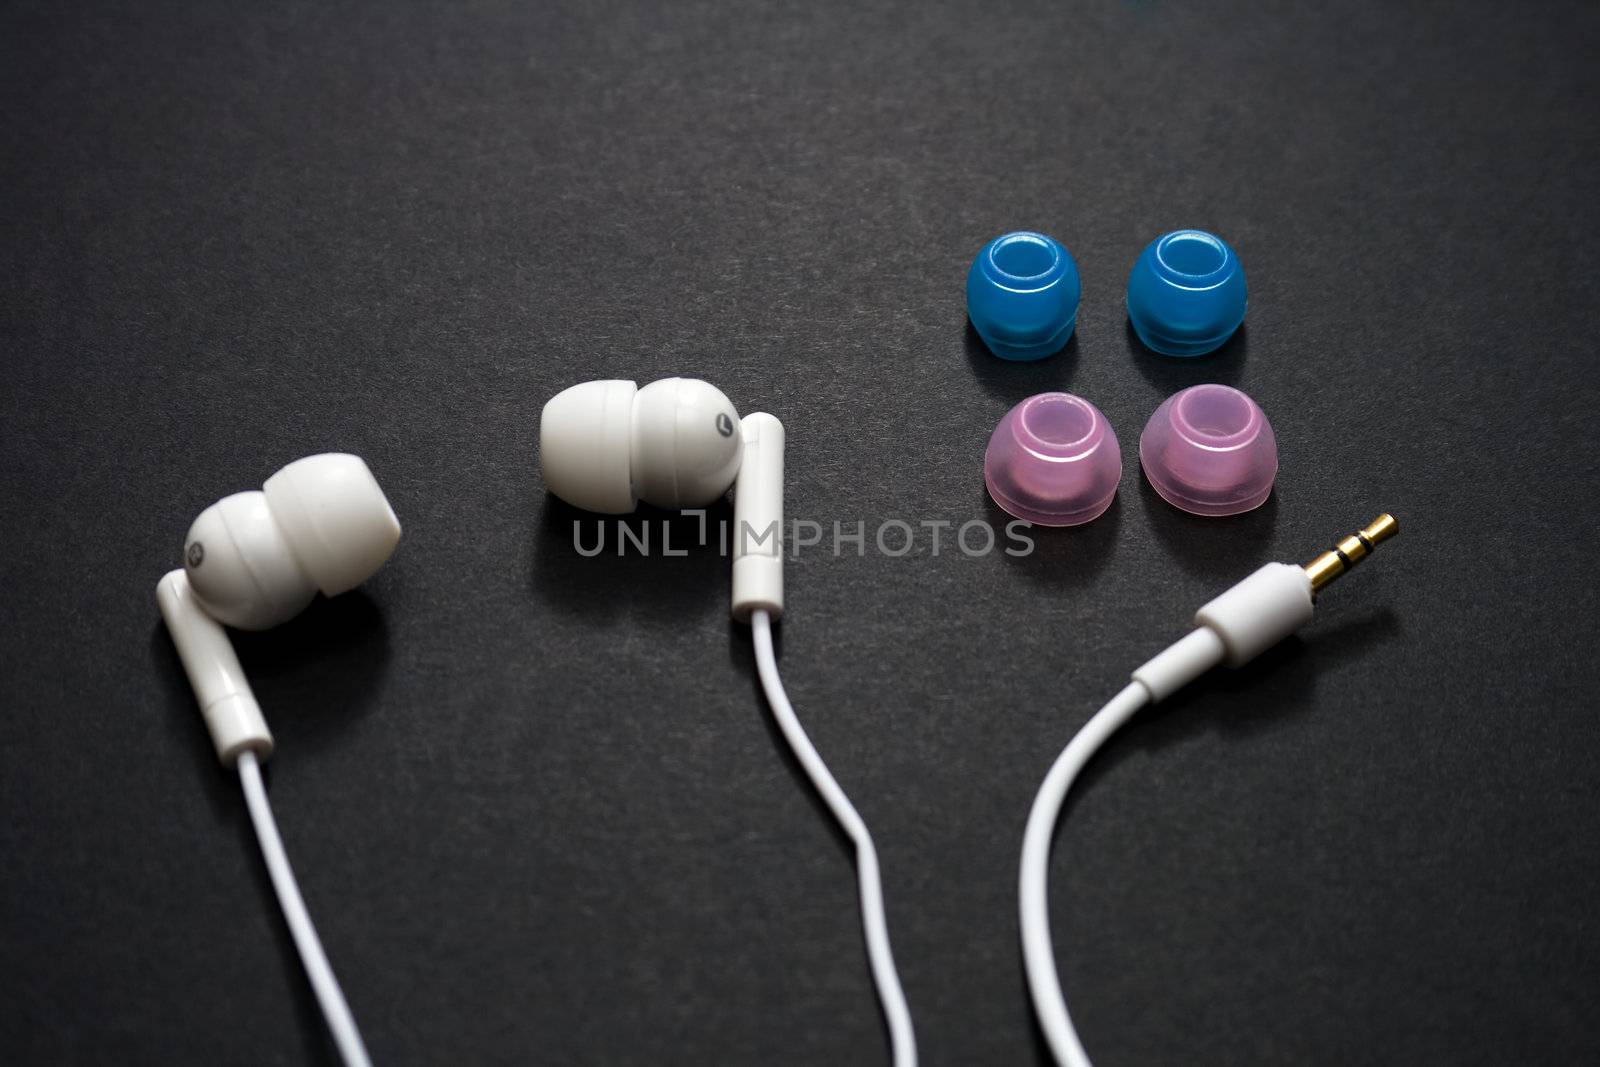 Earbuds by Nickondr